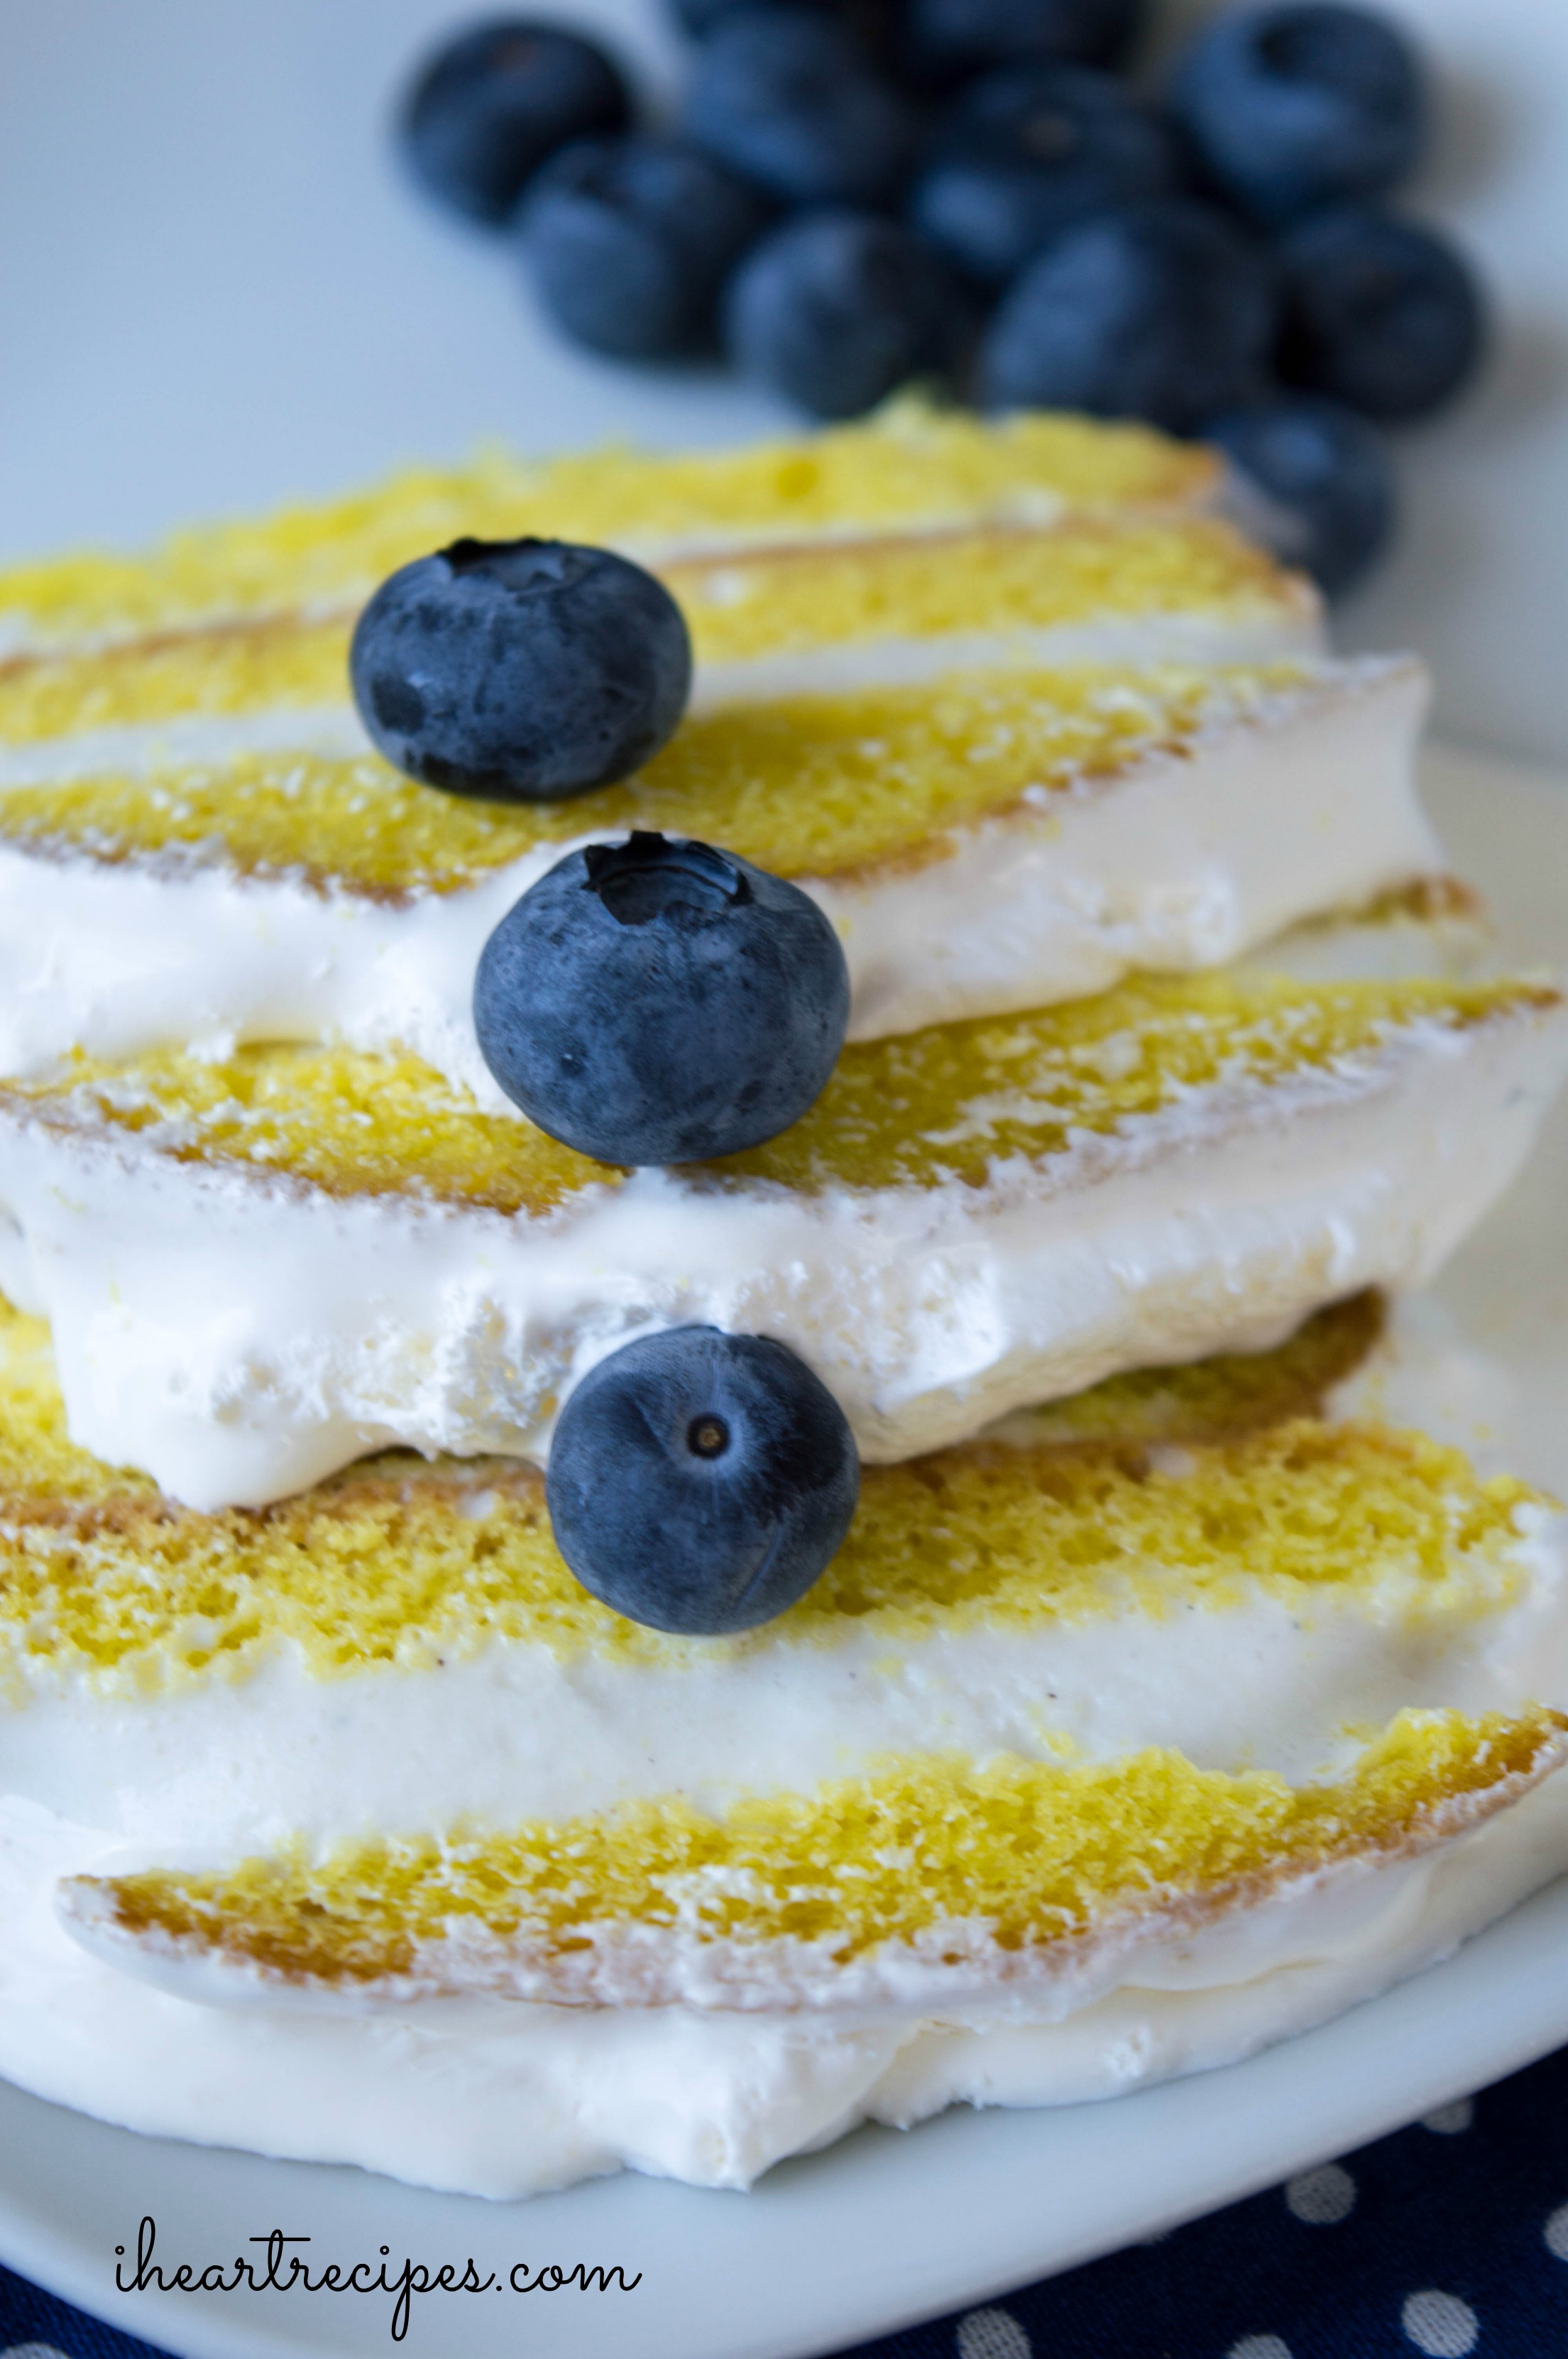 Slices of refreshing lemon ice cream cake topped with crisp blueberries. The perfect sweet summer treat!